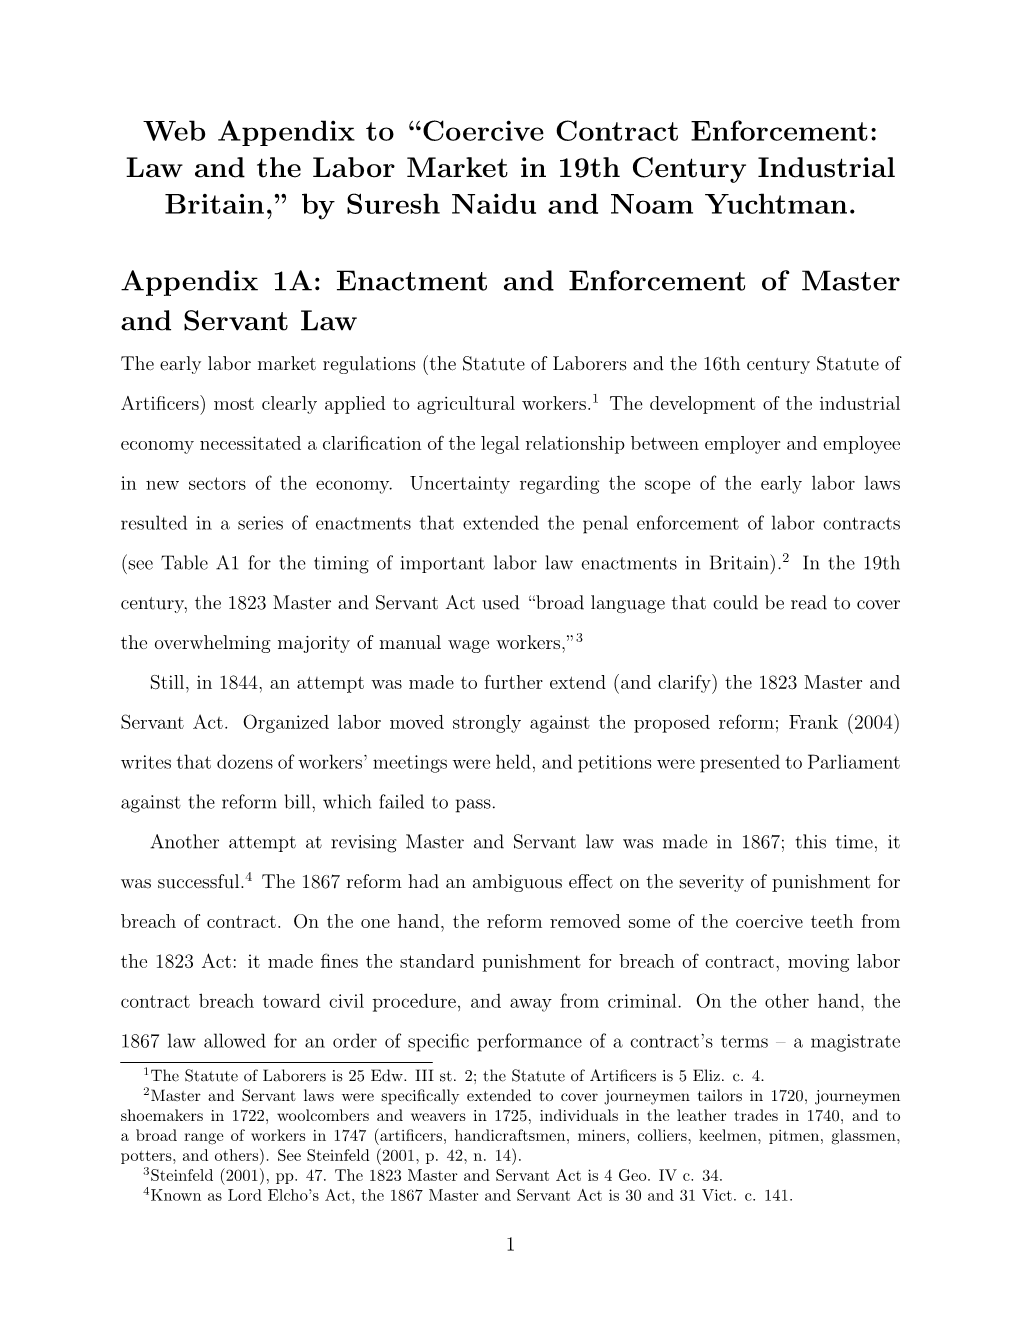 Web Appendix to “Coercive Contract Enforcement: Law and the Labor Market in 19Th Century Industrial Britain,” by Suresh Naidu and Noam Yuchtman